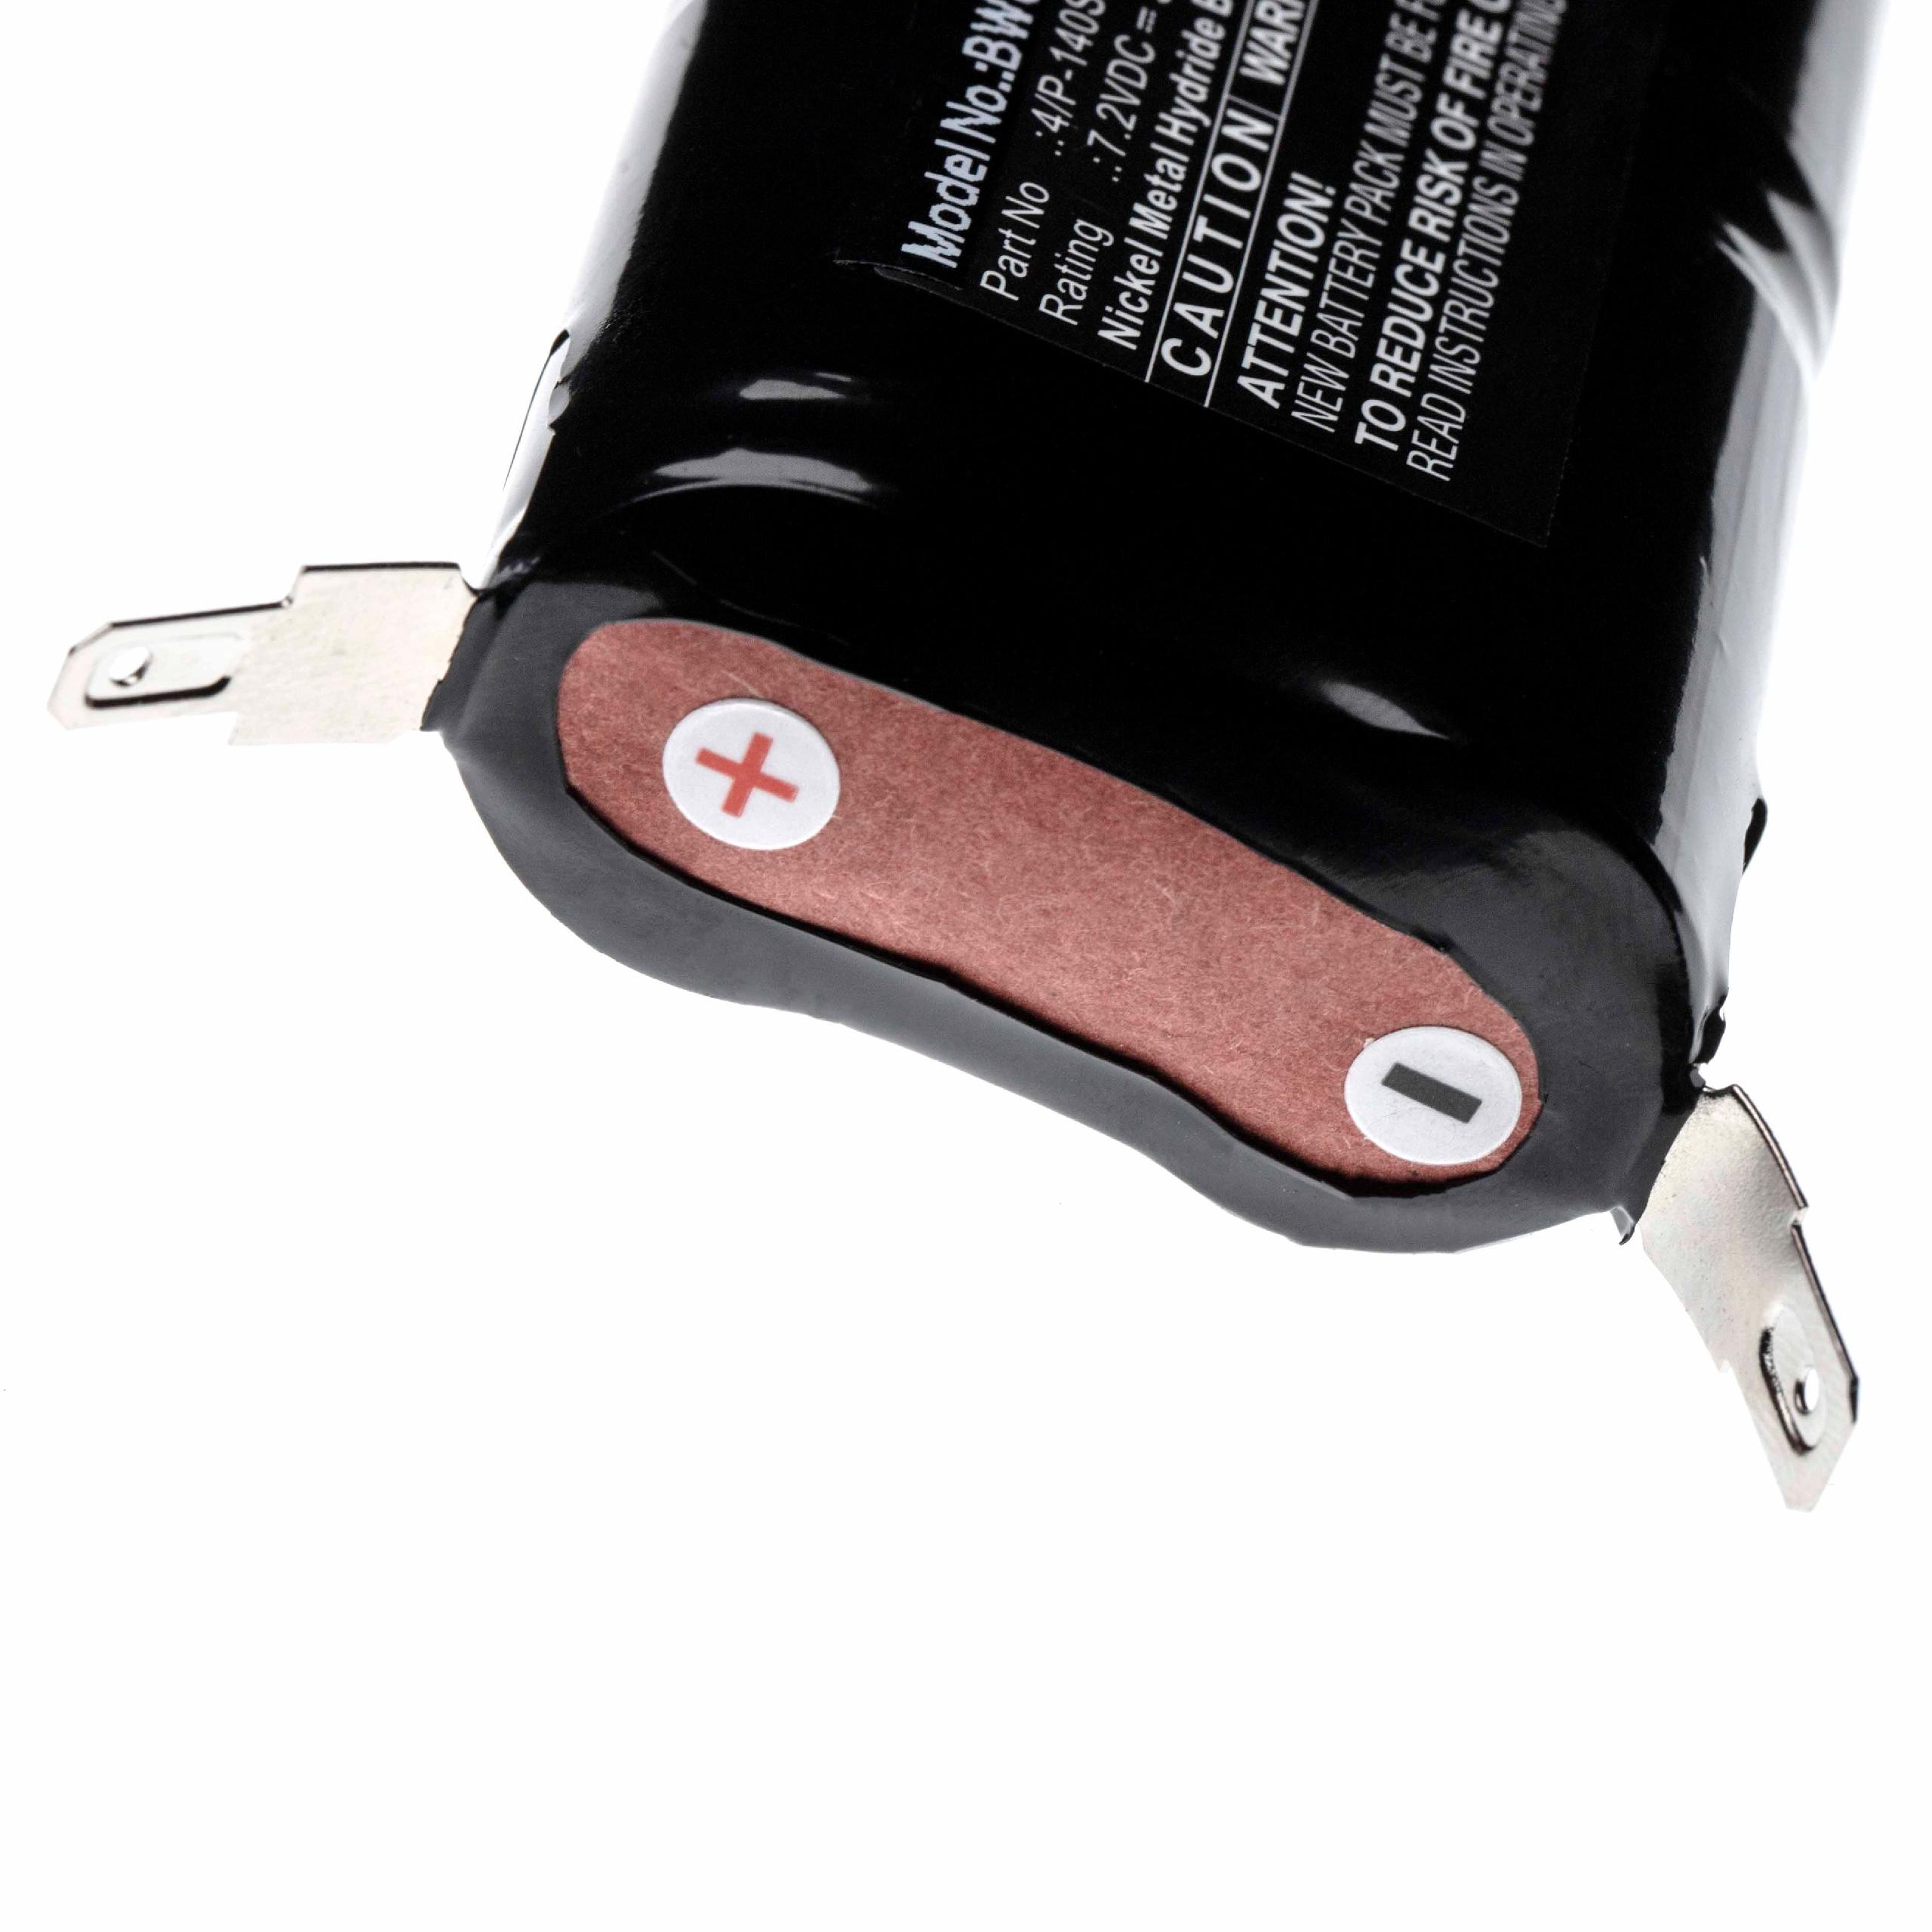 Battery Replacement for Makita BCM-678135-1, 678135-1, 678132-7, 678114-9 for - 3000mAh, 7.2V, NiMH